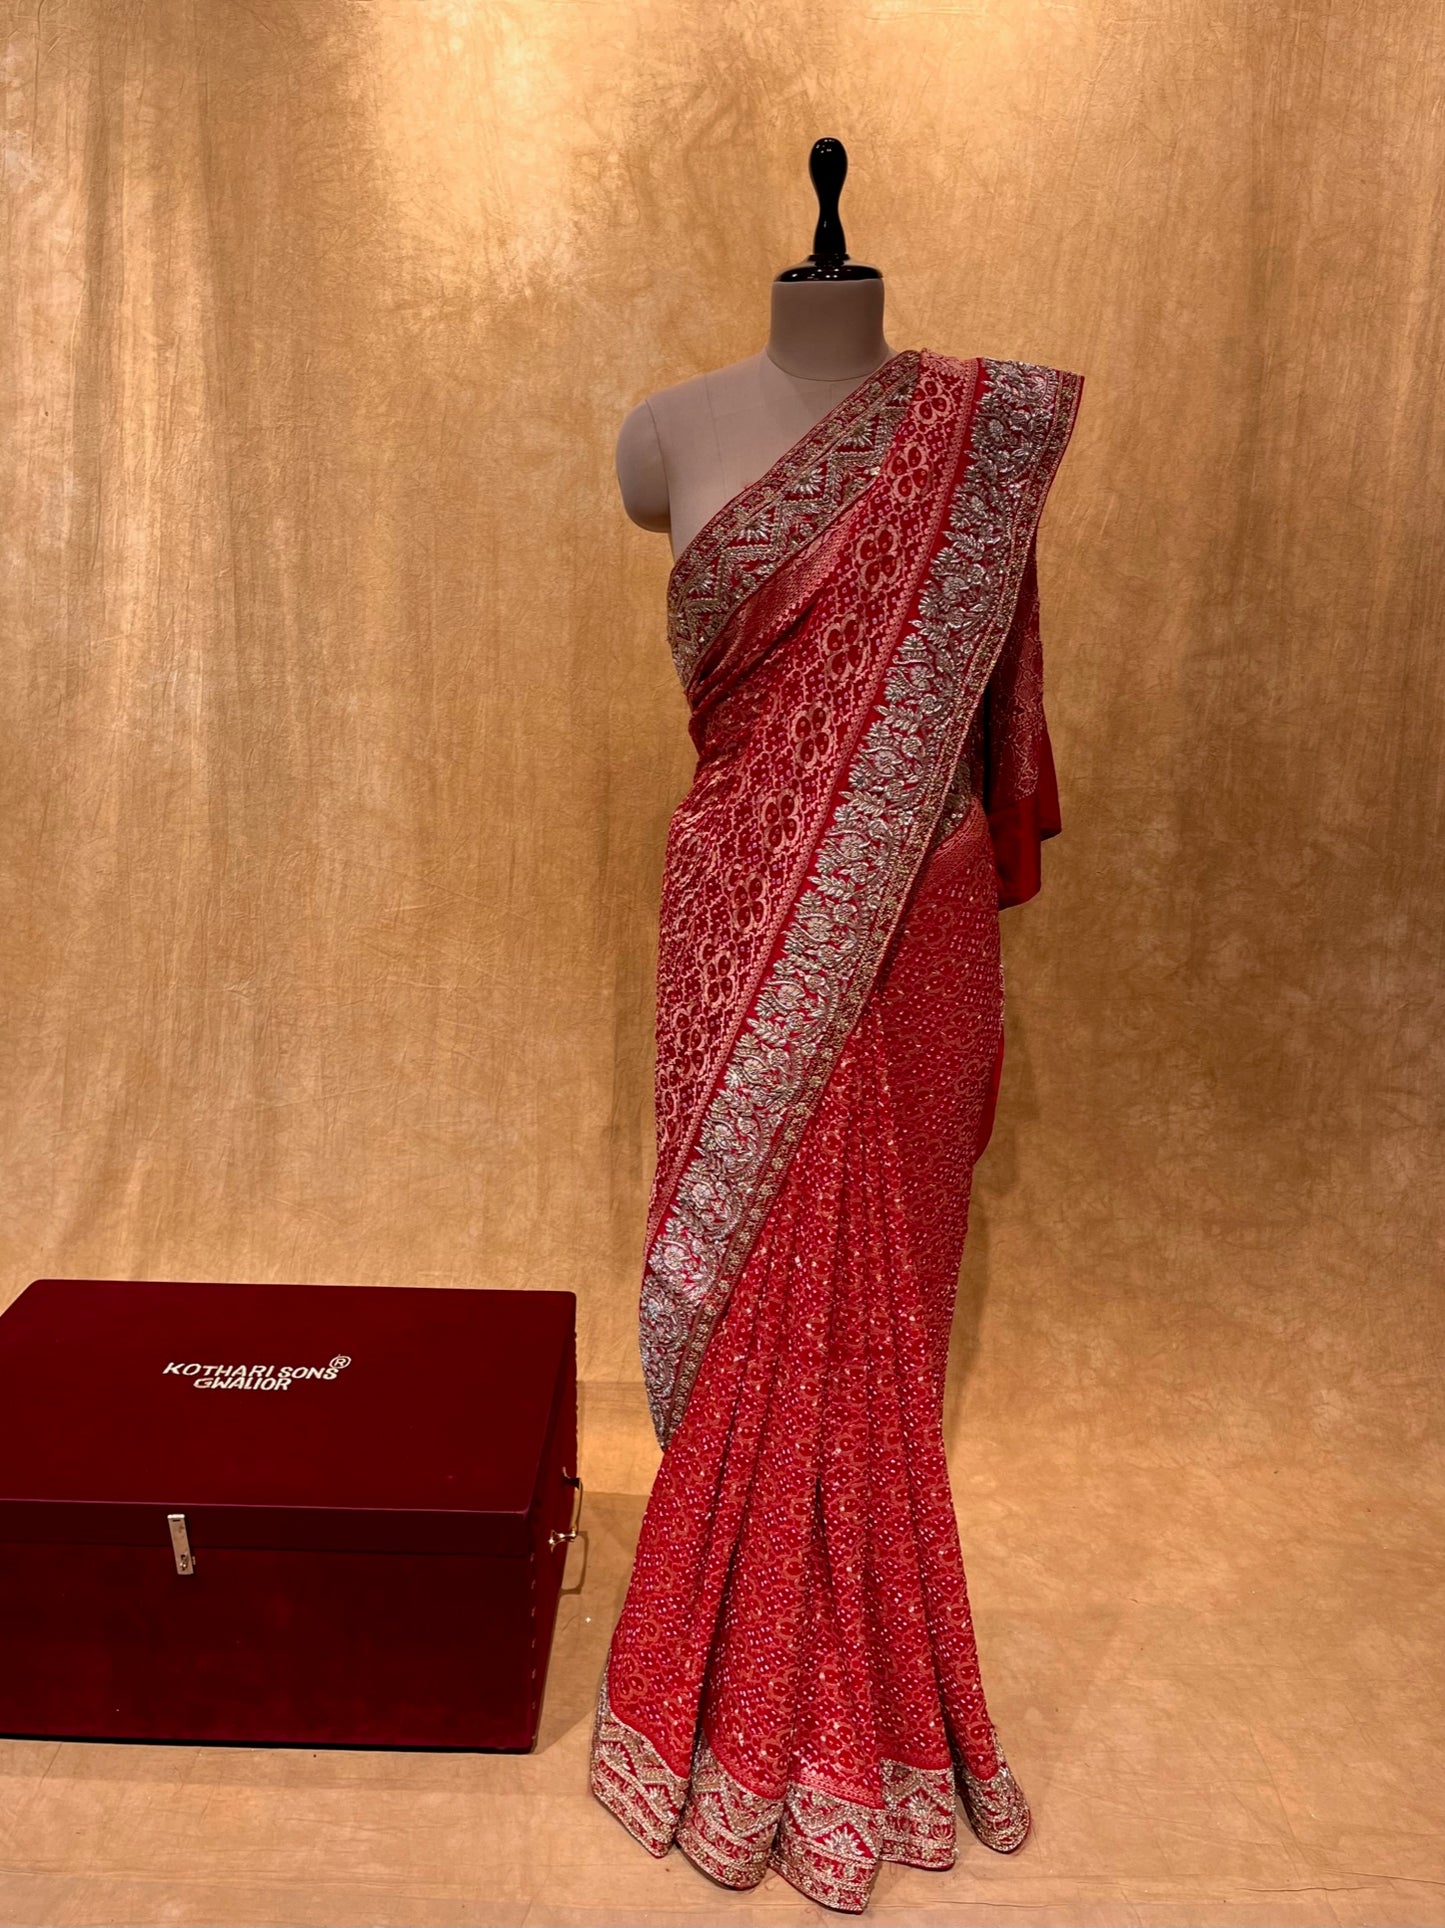 RED COLOUR GEORGETTE KHADDI SAREE EMBELLISHED WITH HAND EMBROIDERED ZARDOZI WORK